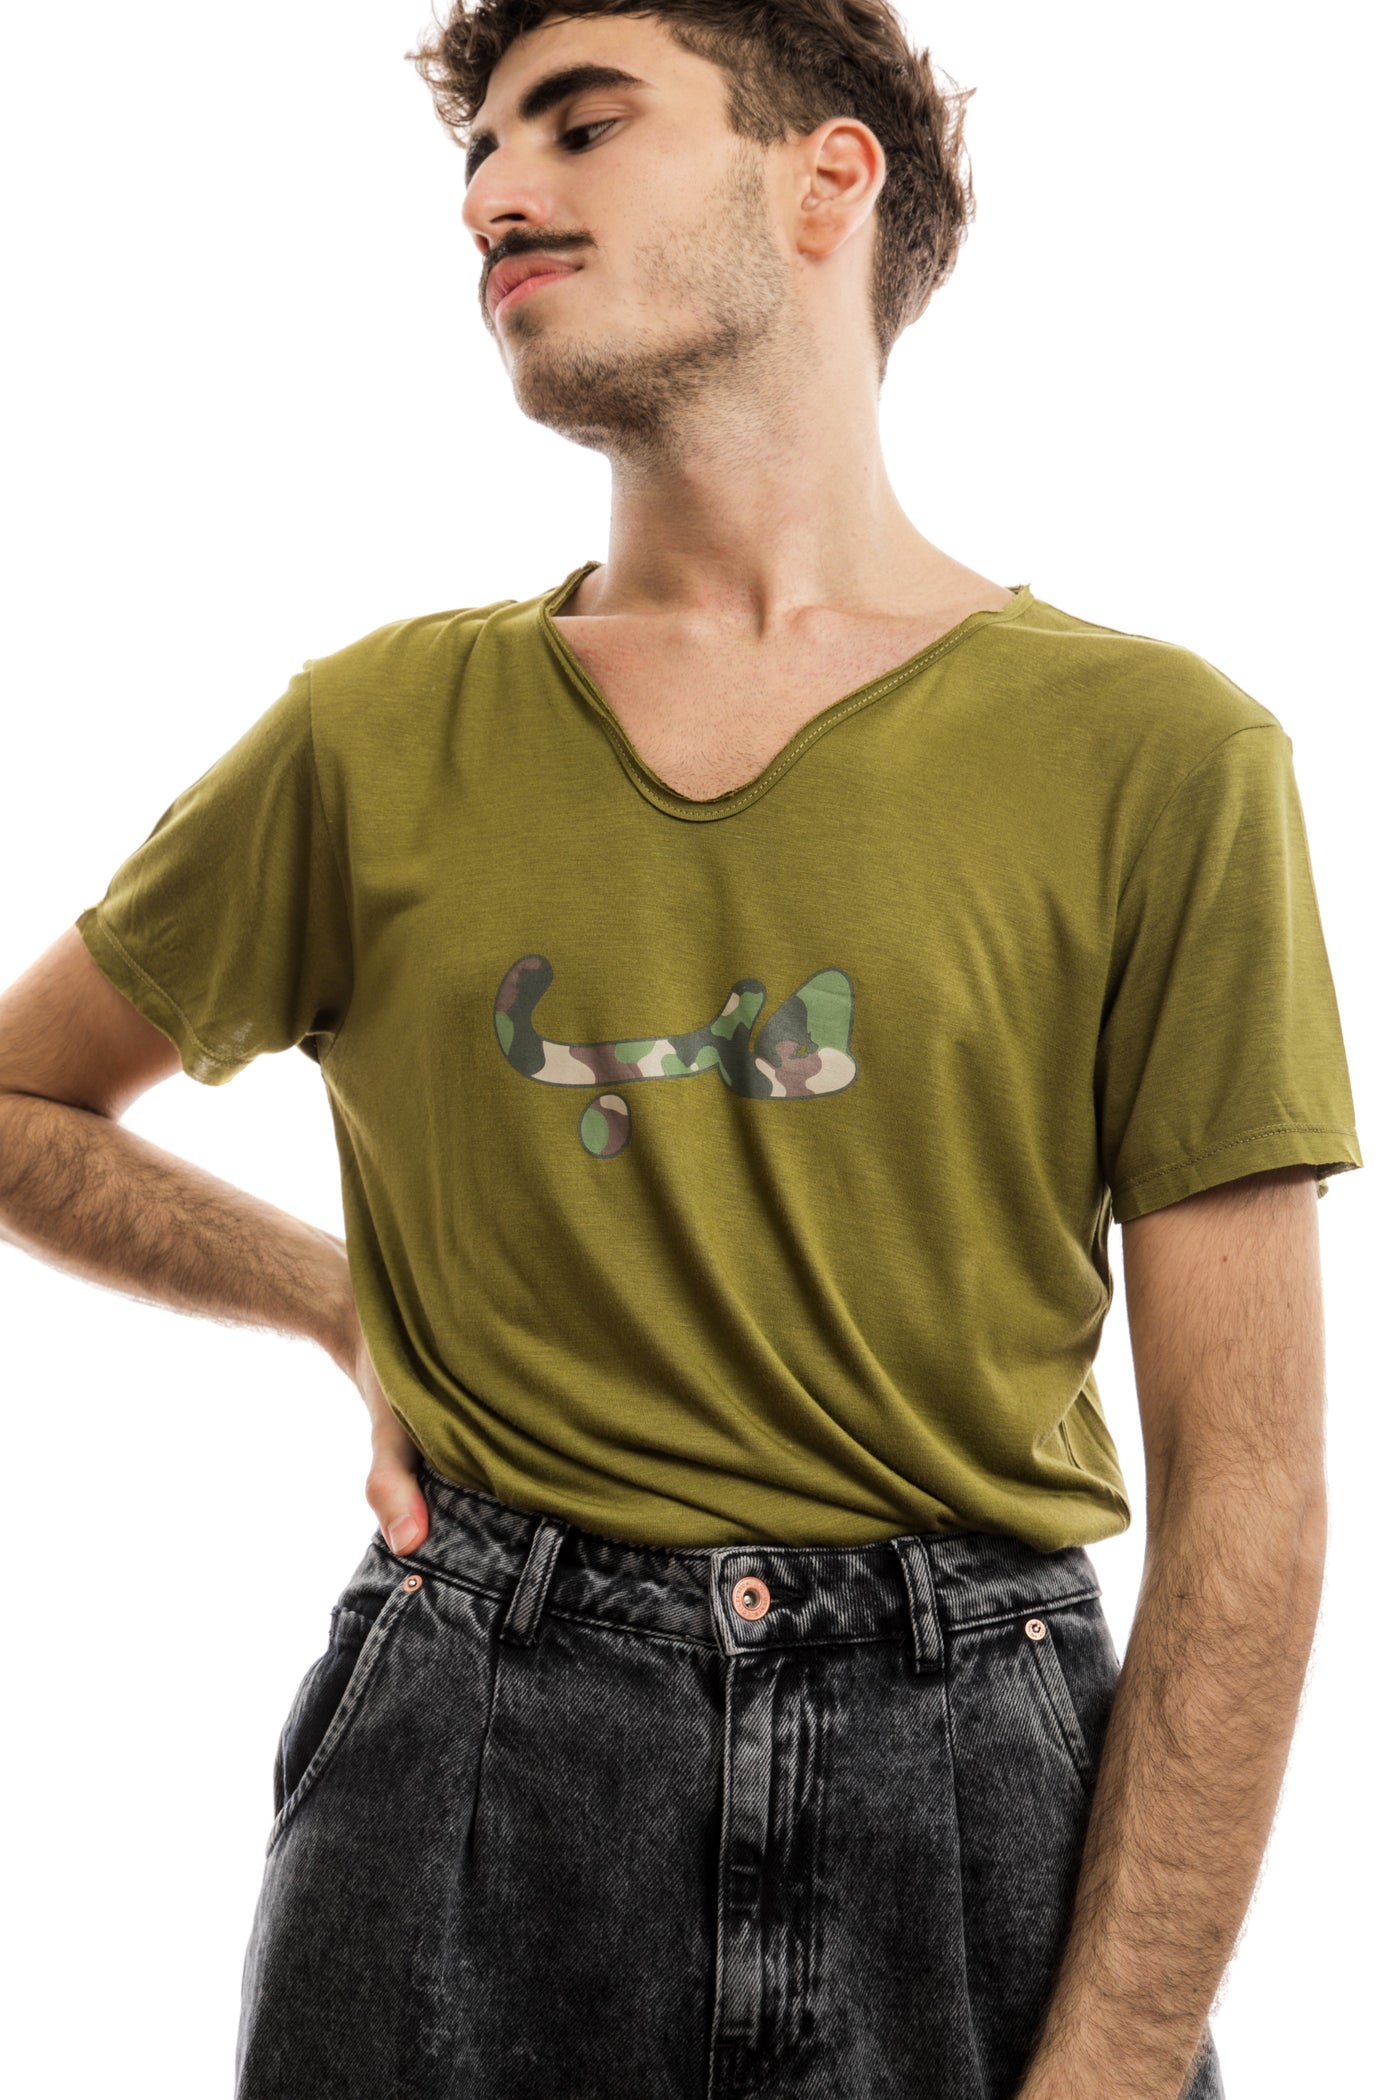 young adult male wearing olive green t-shirt with hobb written in arabic حب and in army pattern in the center of the t-shirt along with black jeans